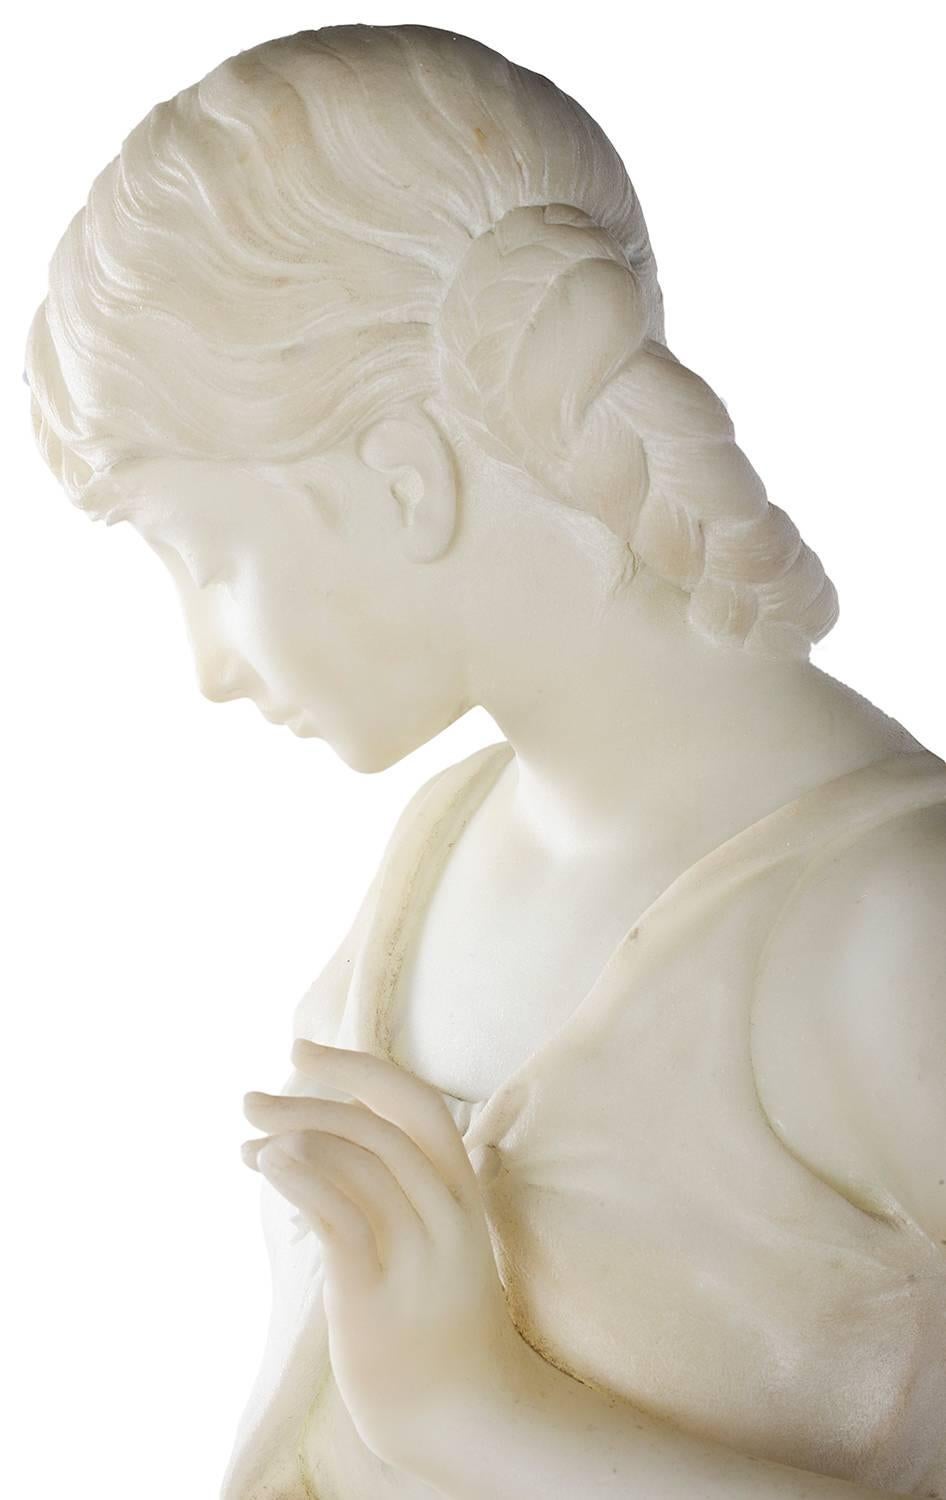 Italian A. Piazza-Carrera, Marble Statue of Young Girl